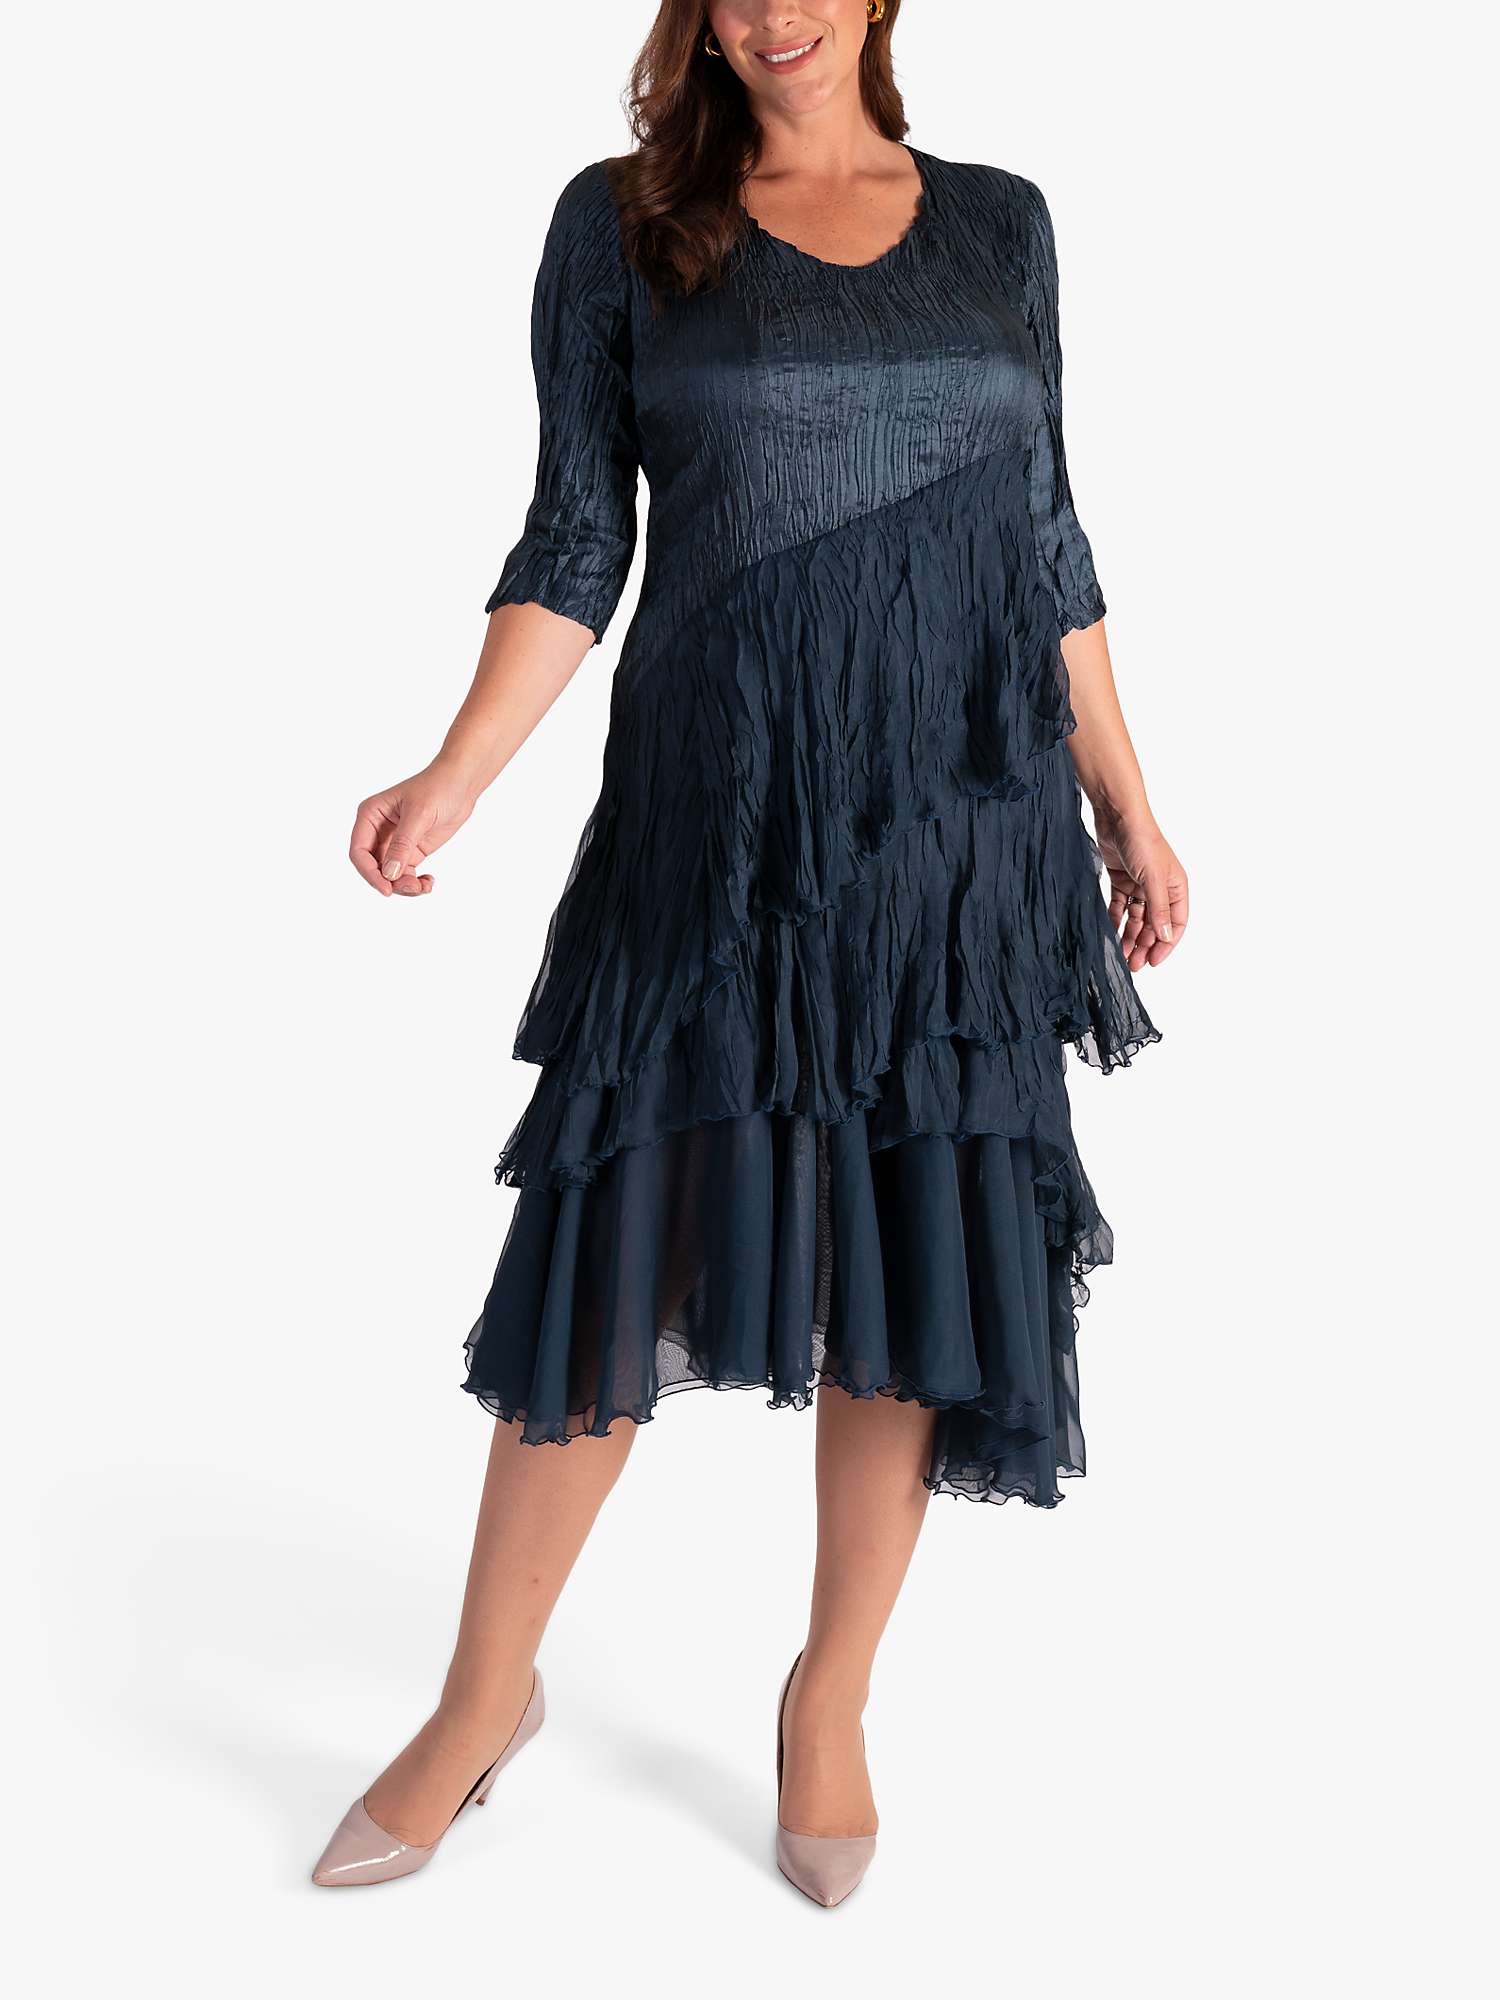 Buy chesca Satin Chiffon Crush Pleated Tiered Dress Online at johnlewis.com